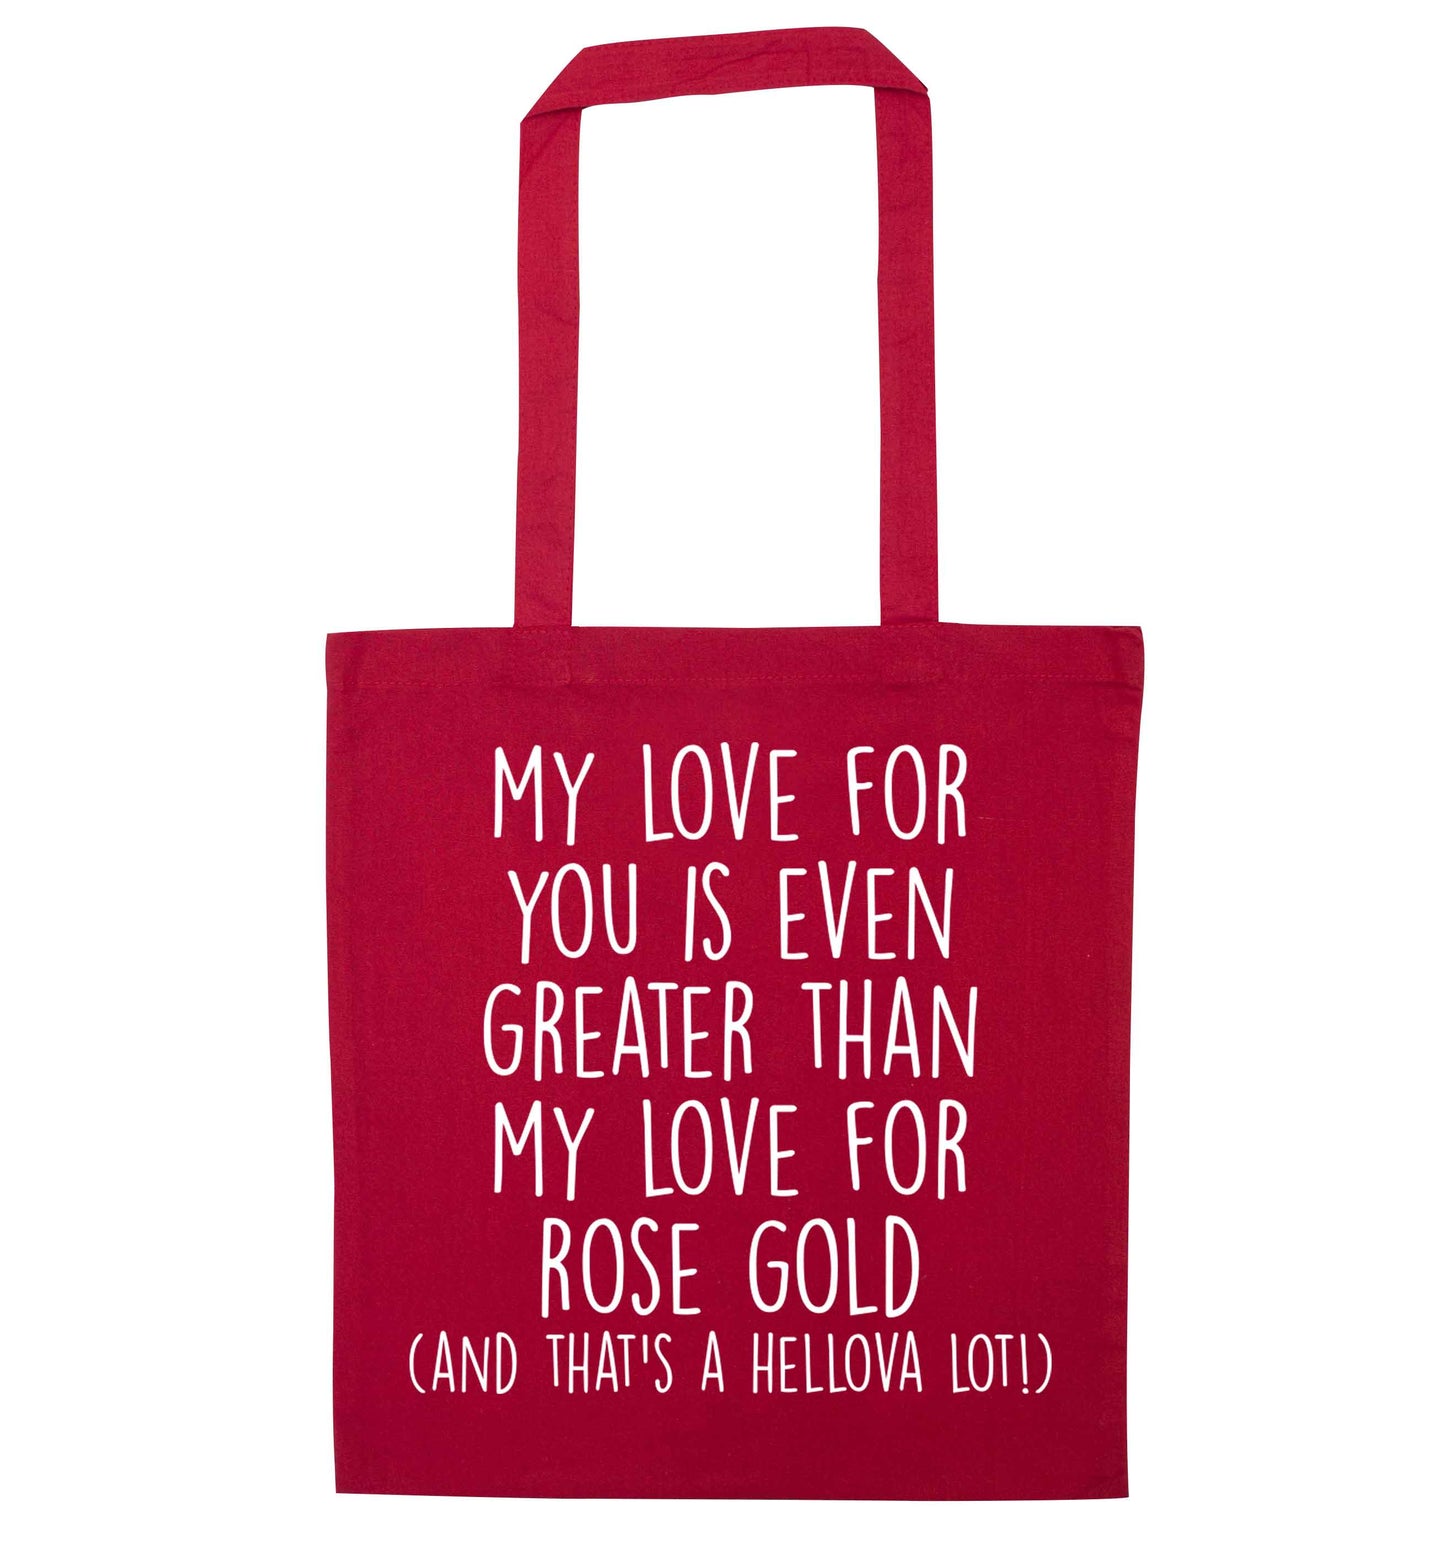 My love for you is even greater than my love for rose gold (and that's a hellova lot) red tote bag